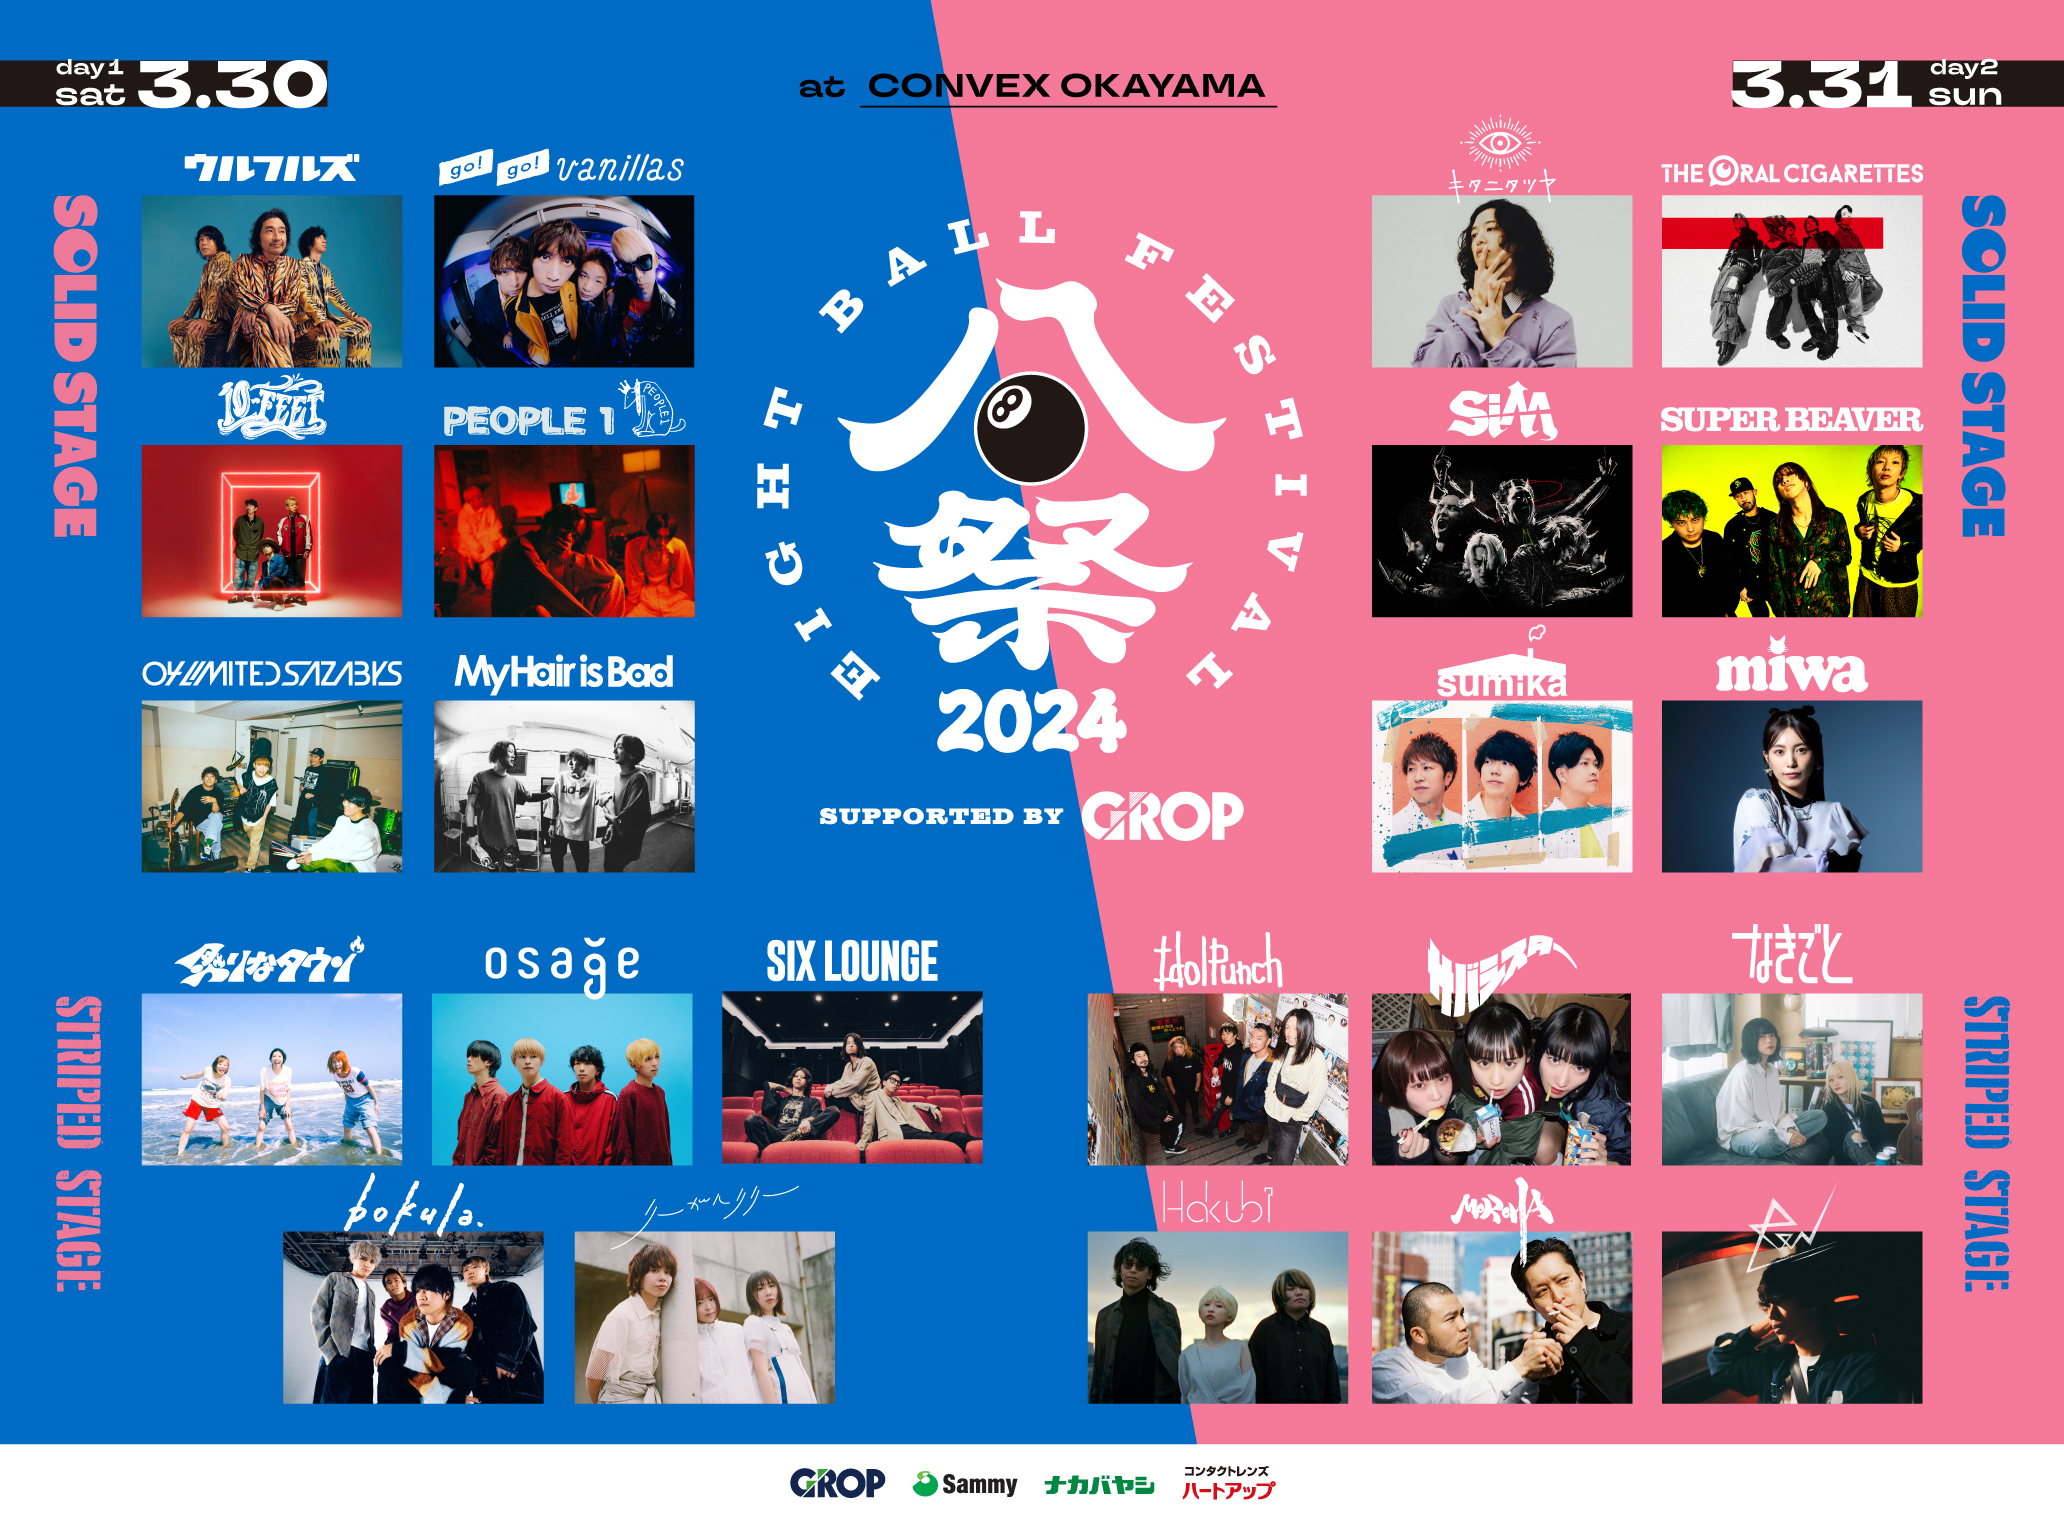 "EIGHT BALL FESTIVAL 2024 supported by GROP" 出演決定！